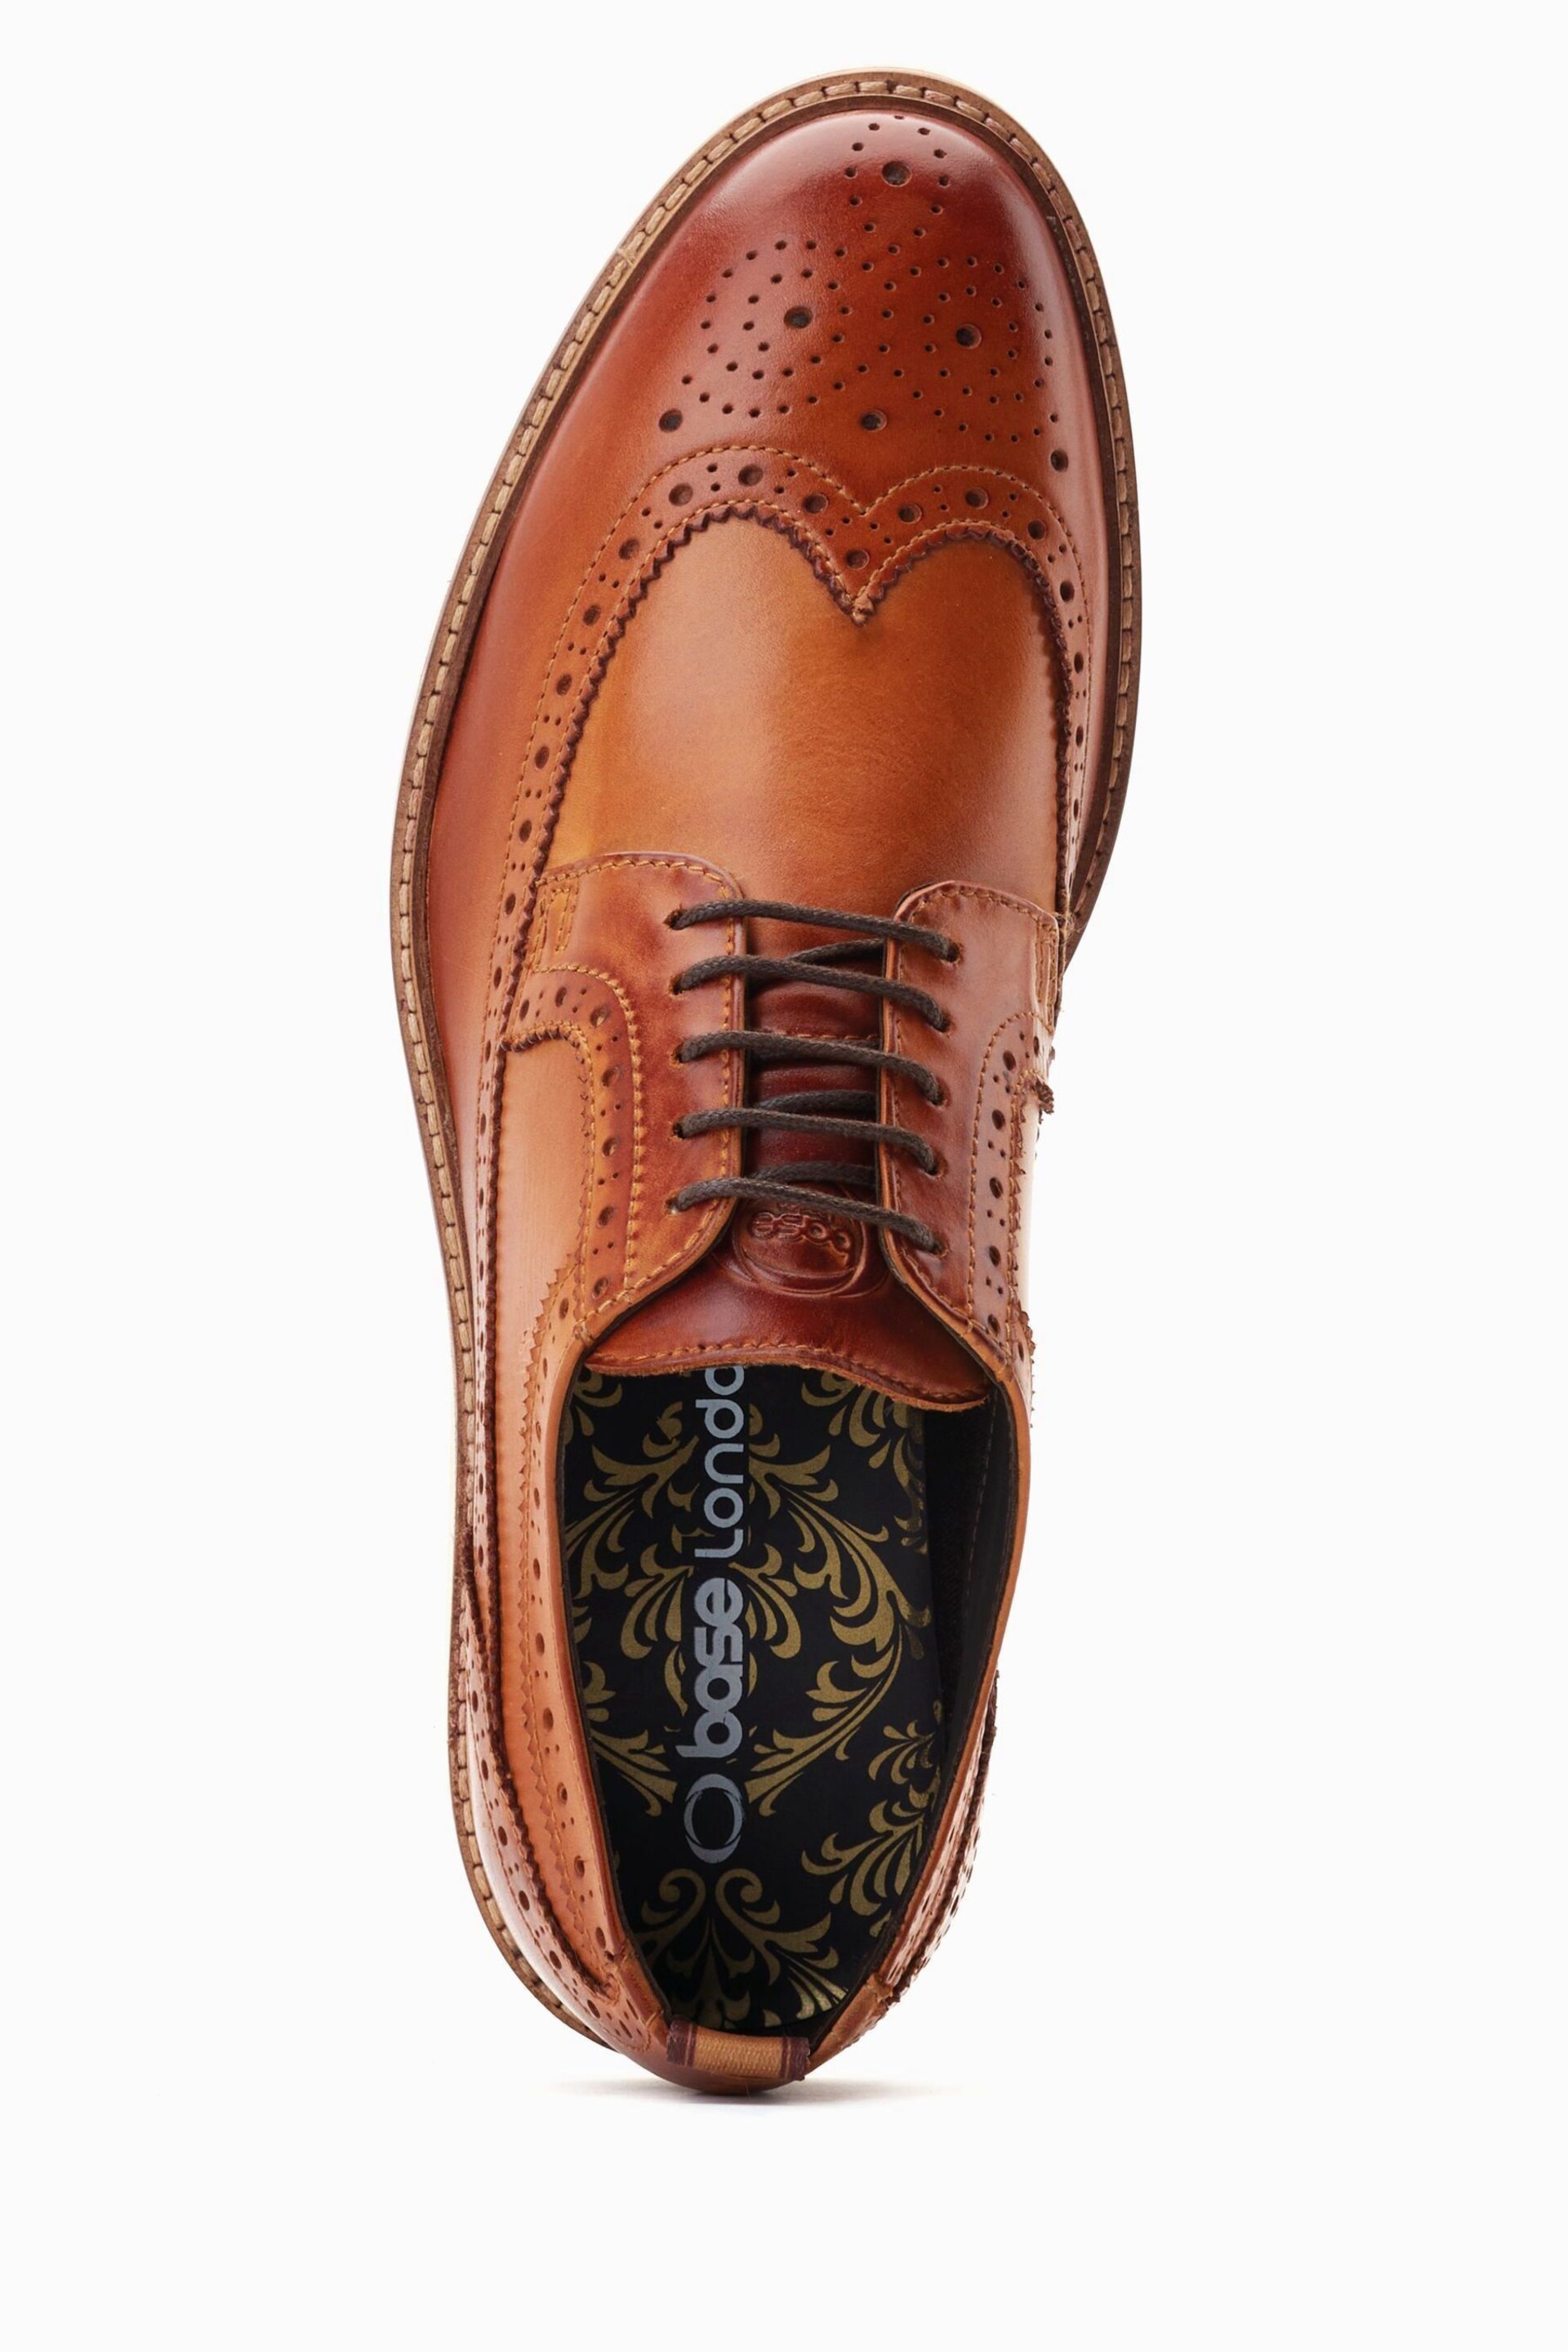 Base London Sully Lace Up Brogue Shoes - Image 4 of 6